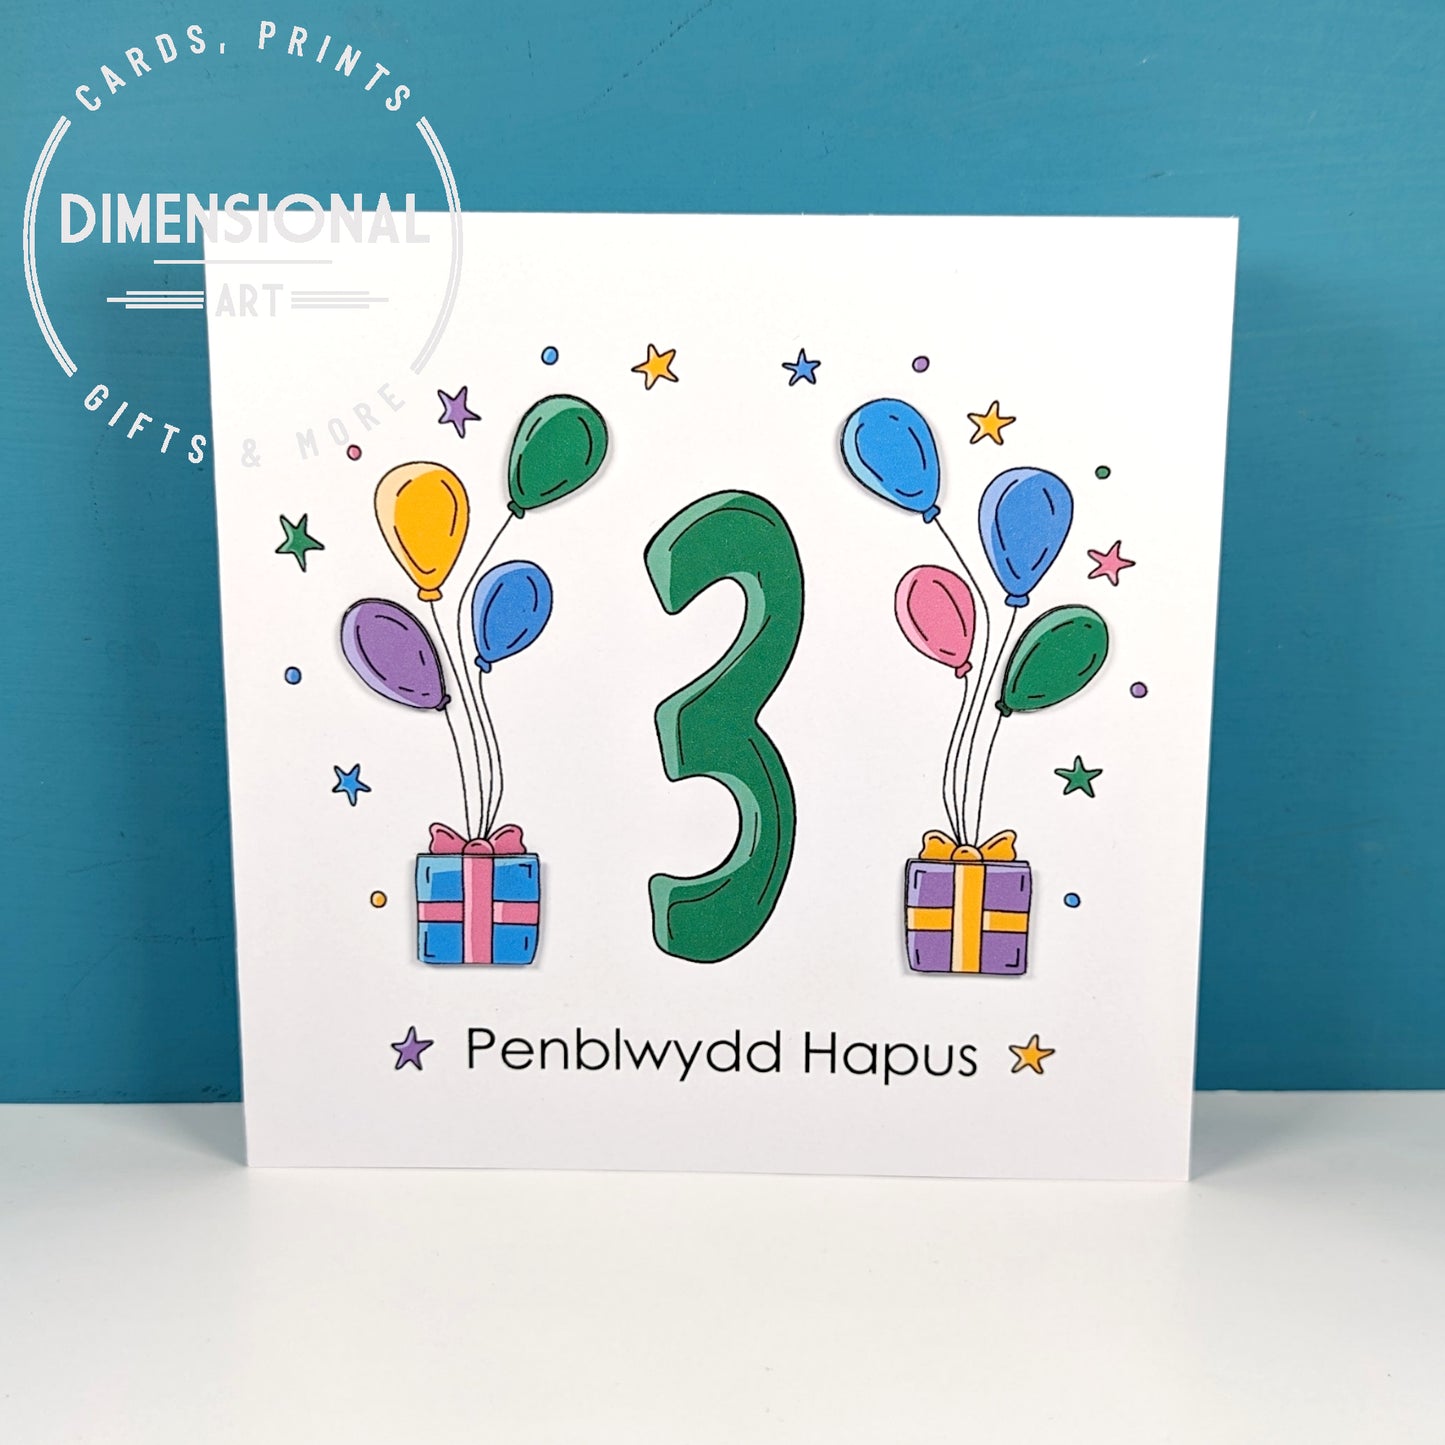 3rd balloons and presents Penblwydd Hapus (Birthday) Card - Welsh